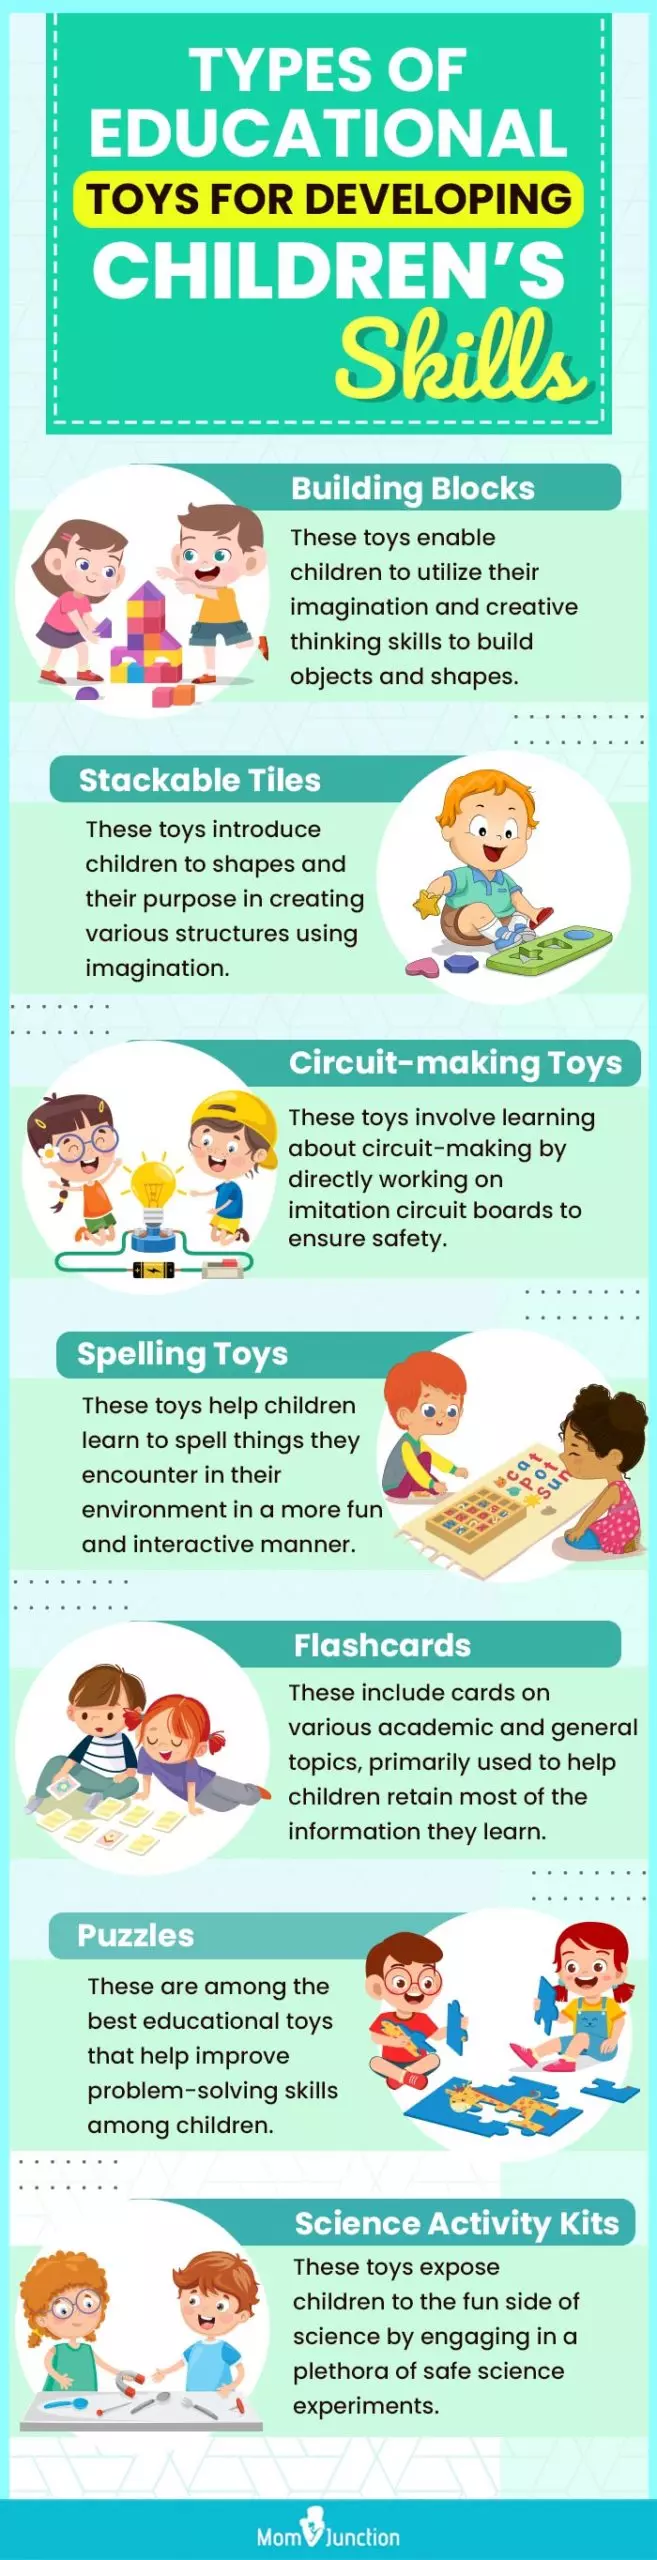 Types-Of-Educational-Toys-For-Developing-Children’s-Skills (infographic)